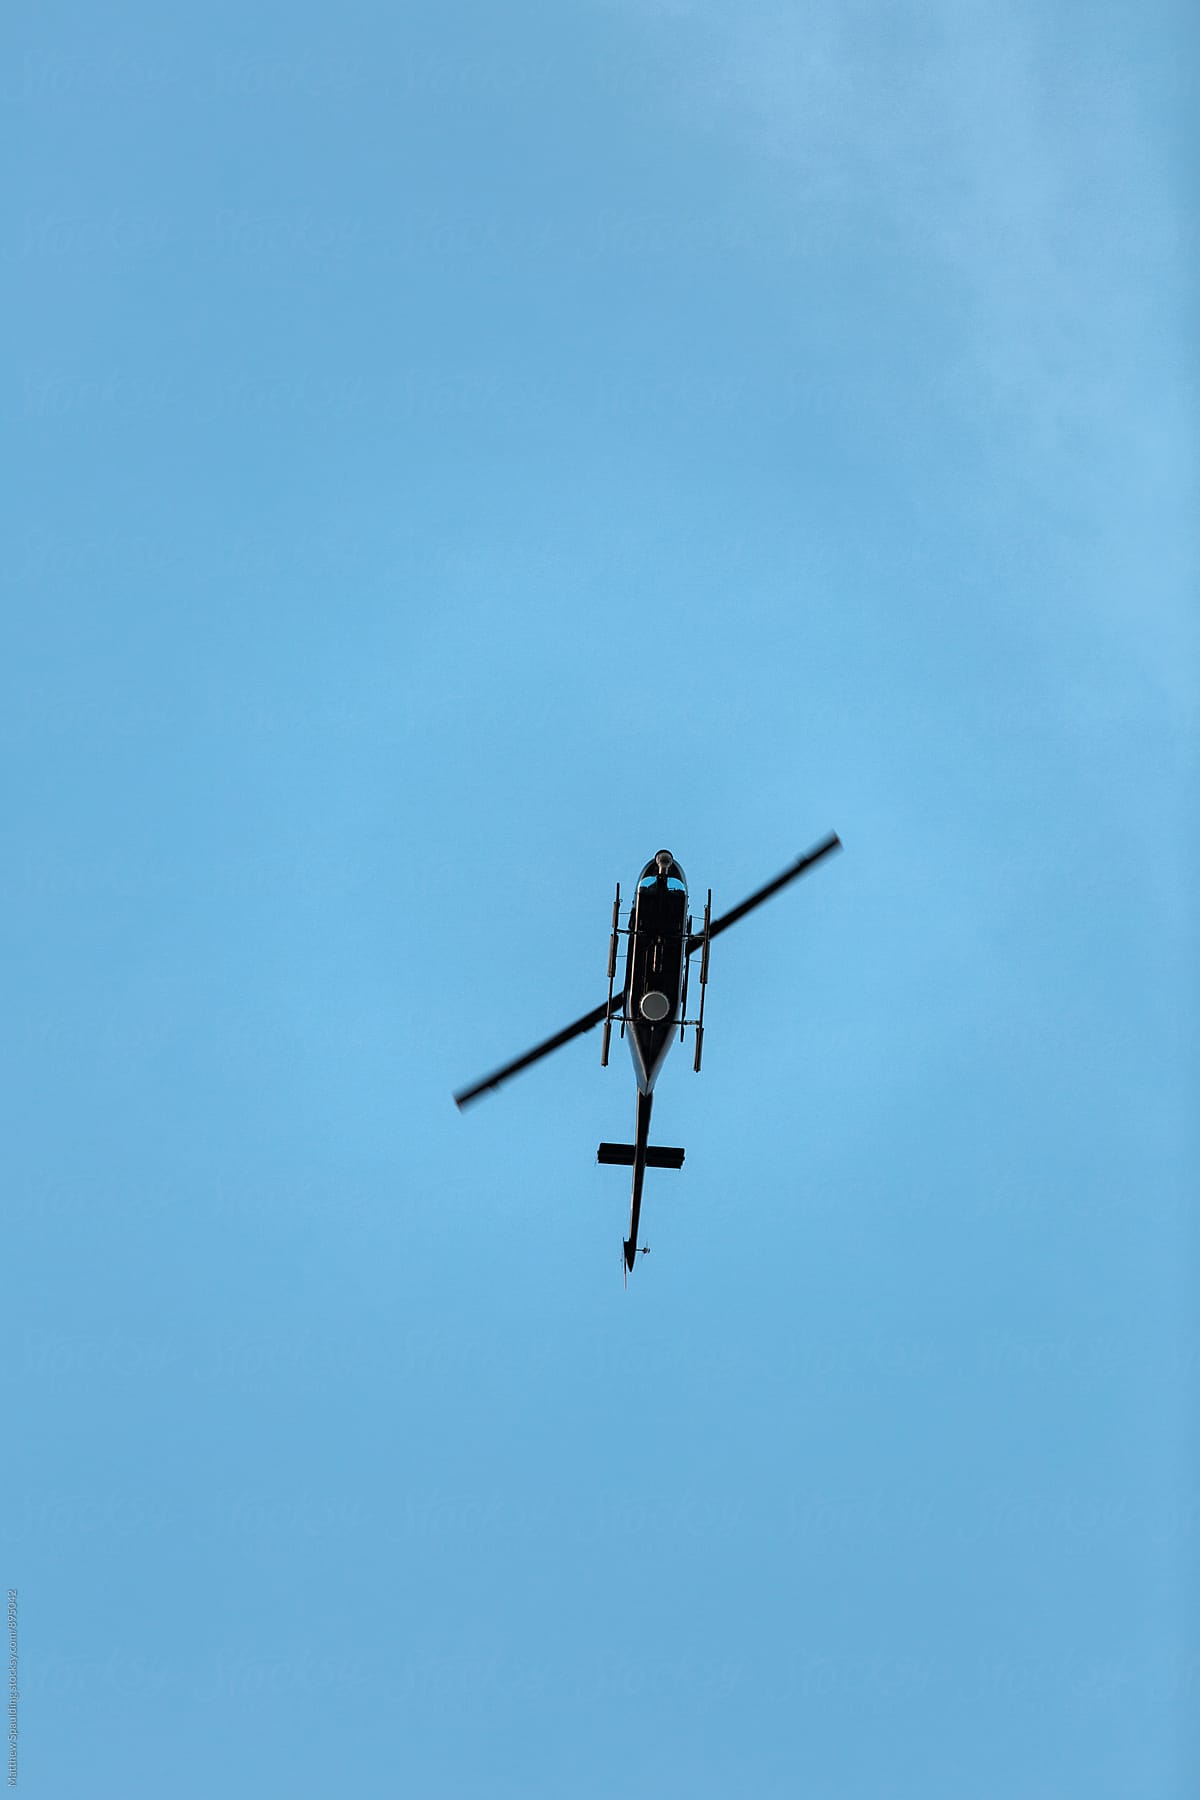 Helicopter hovering above in sky